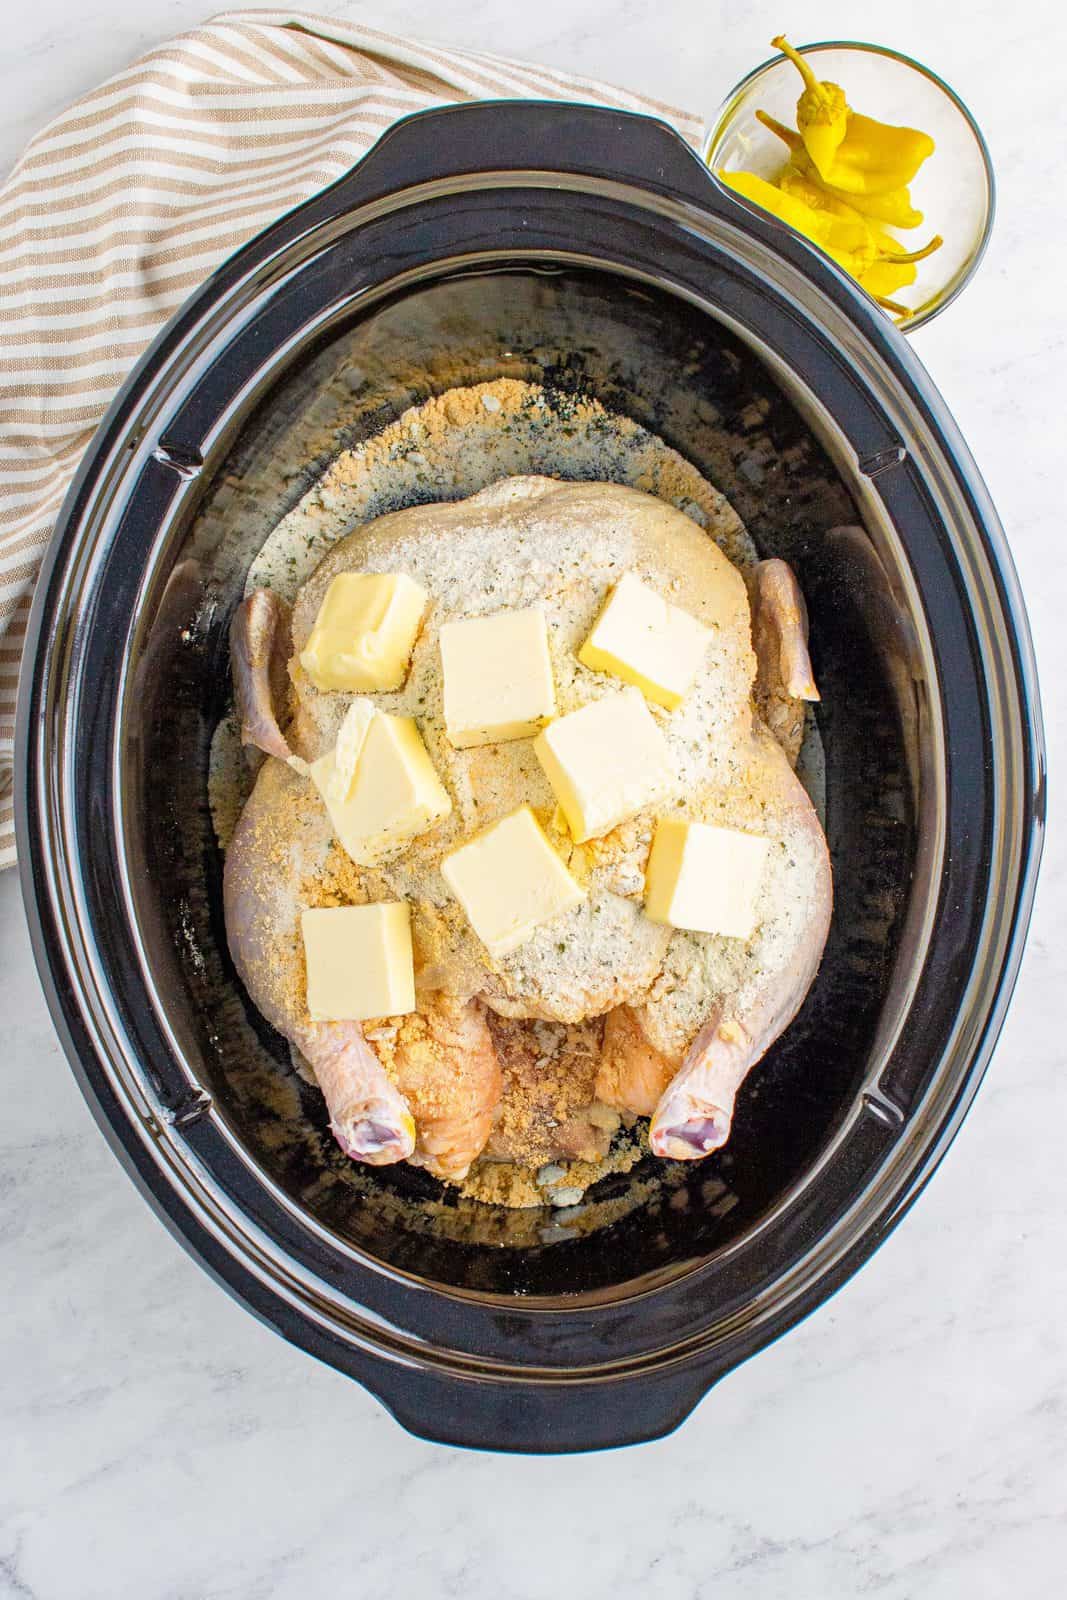 Pats of butter on top of chicken in crock pot.